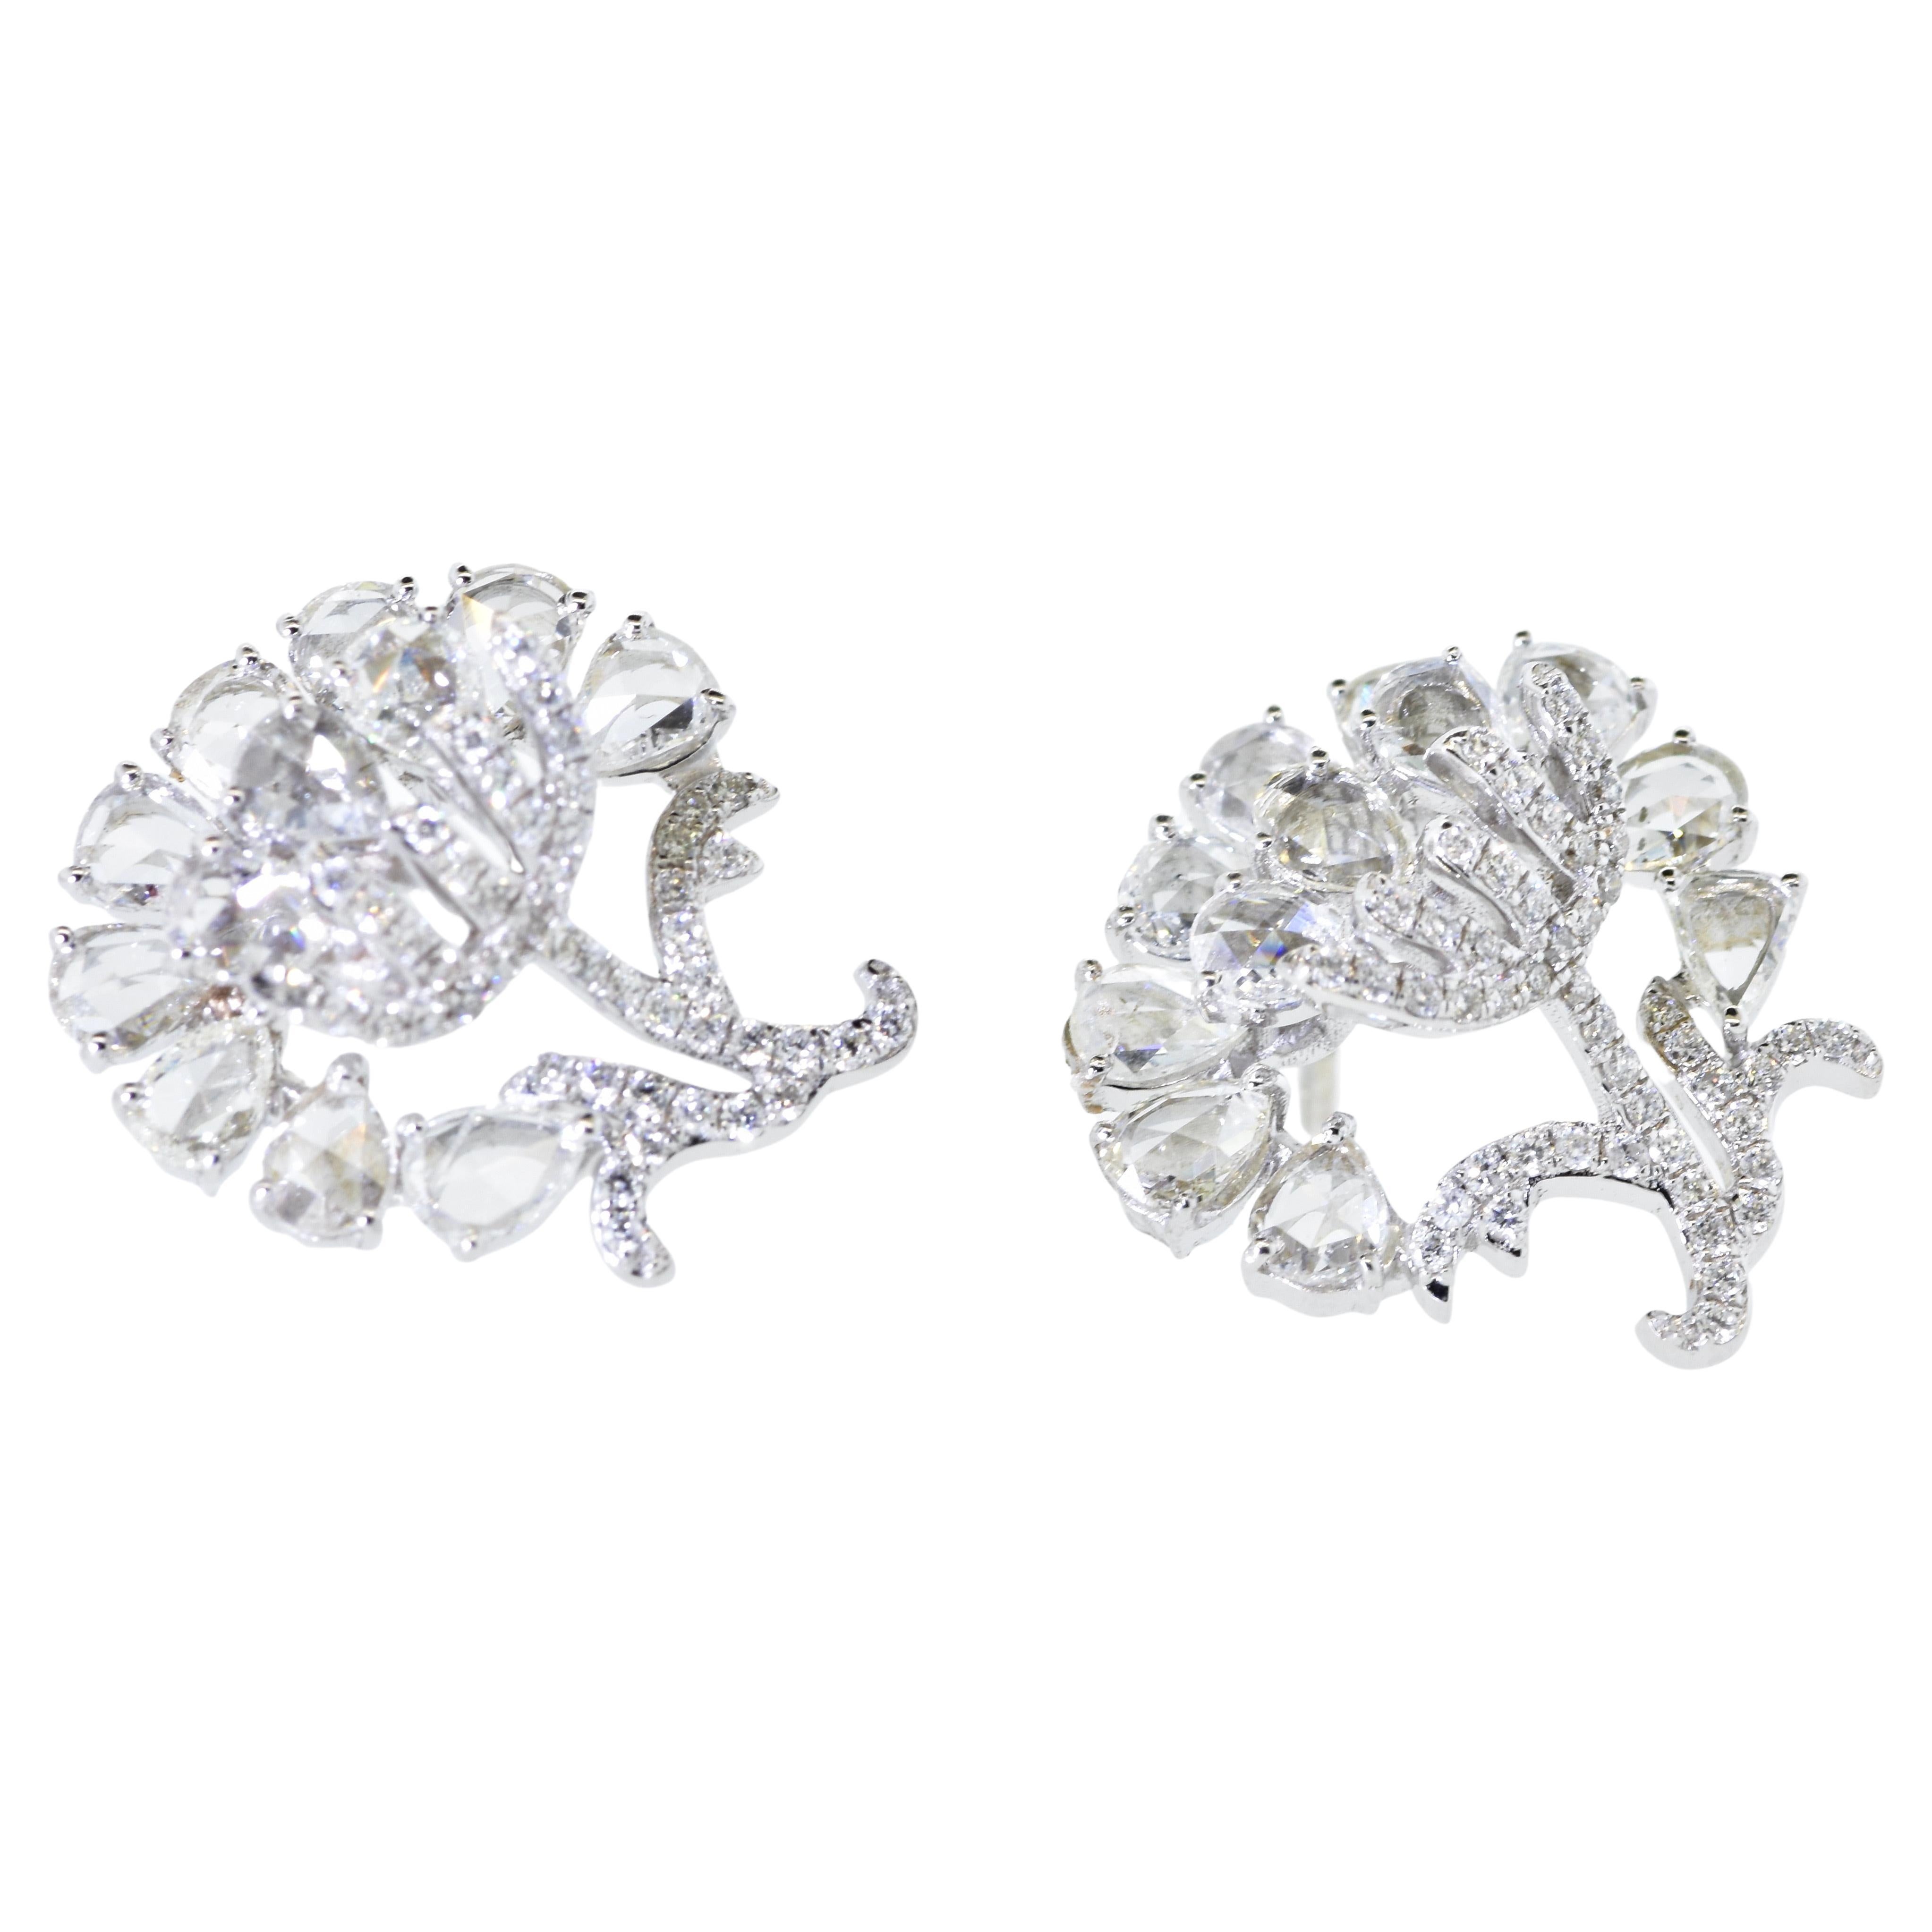 Fine white diamonds are well set in these contemporary flower motif earrings.  There are 3 cts. of diamonds in both the round brilliant cut diamonds and the rose cut diamonds.  The diamonds are near colorless and very slightly included.  The